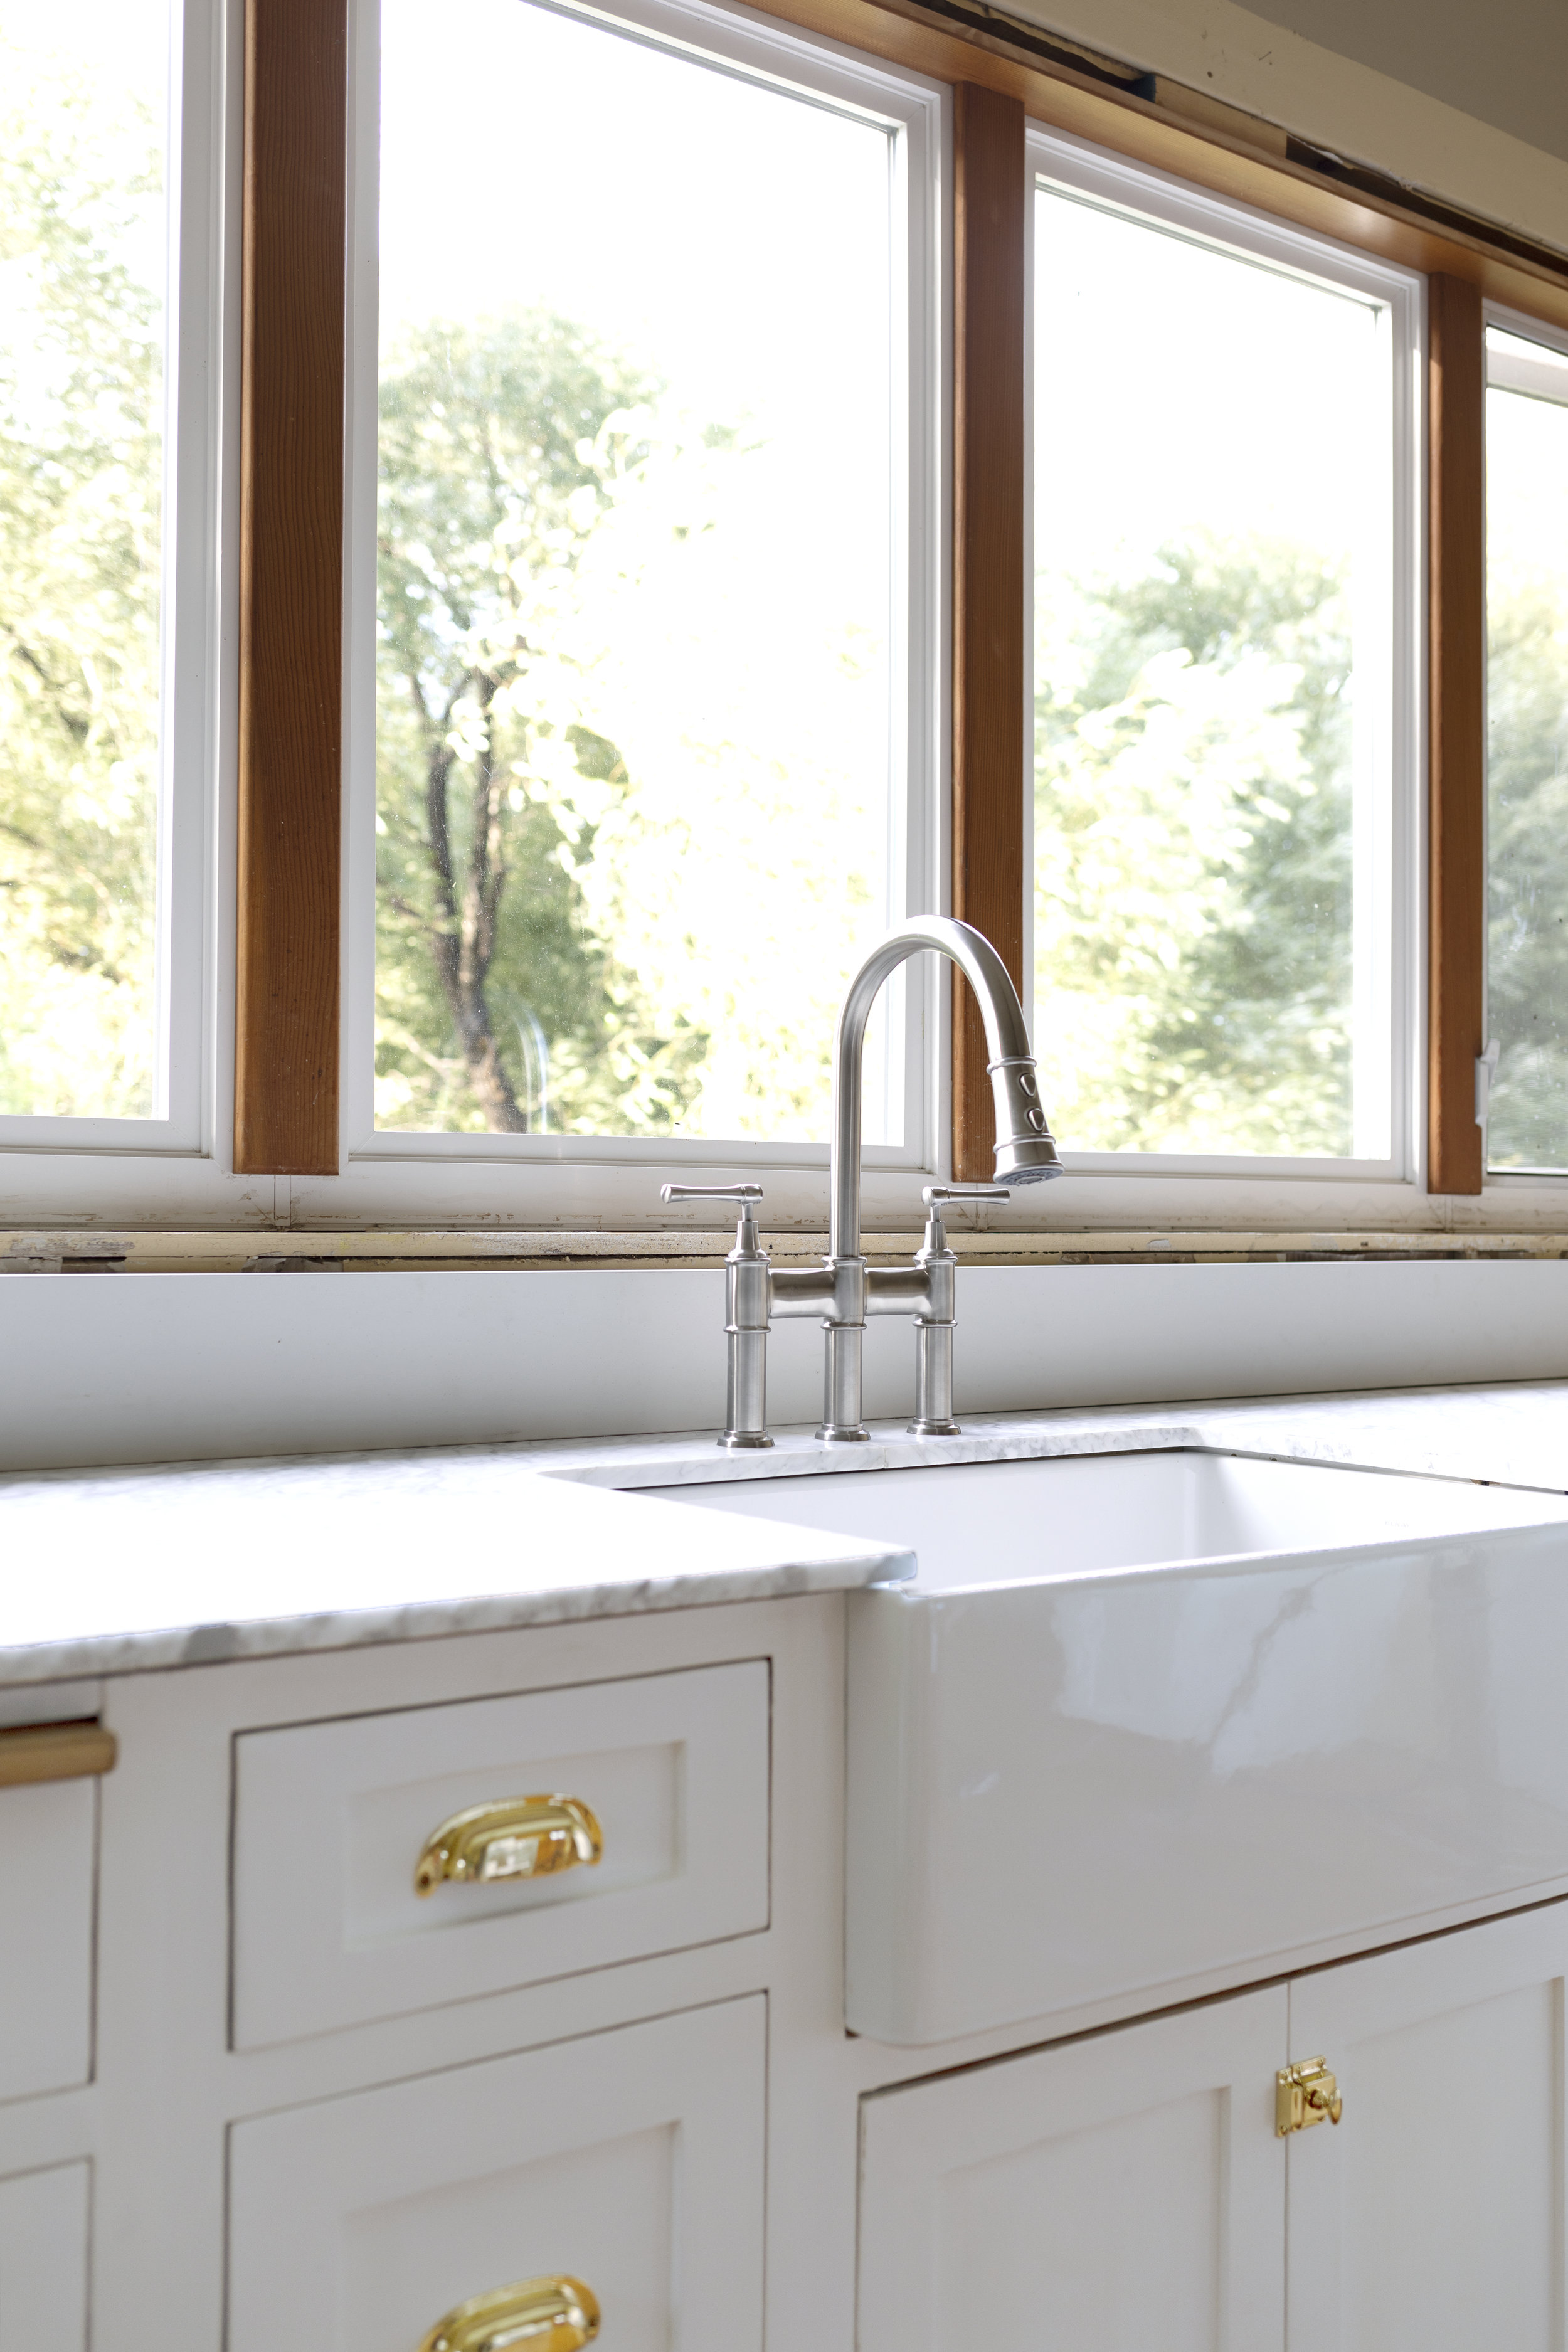 Kohler Sous Pull Down Faucet Review Just Like The Pros